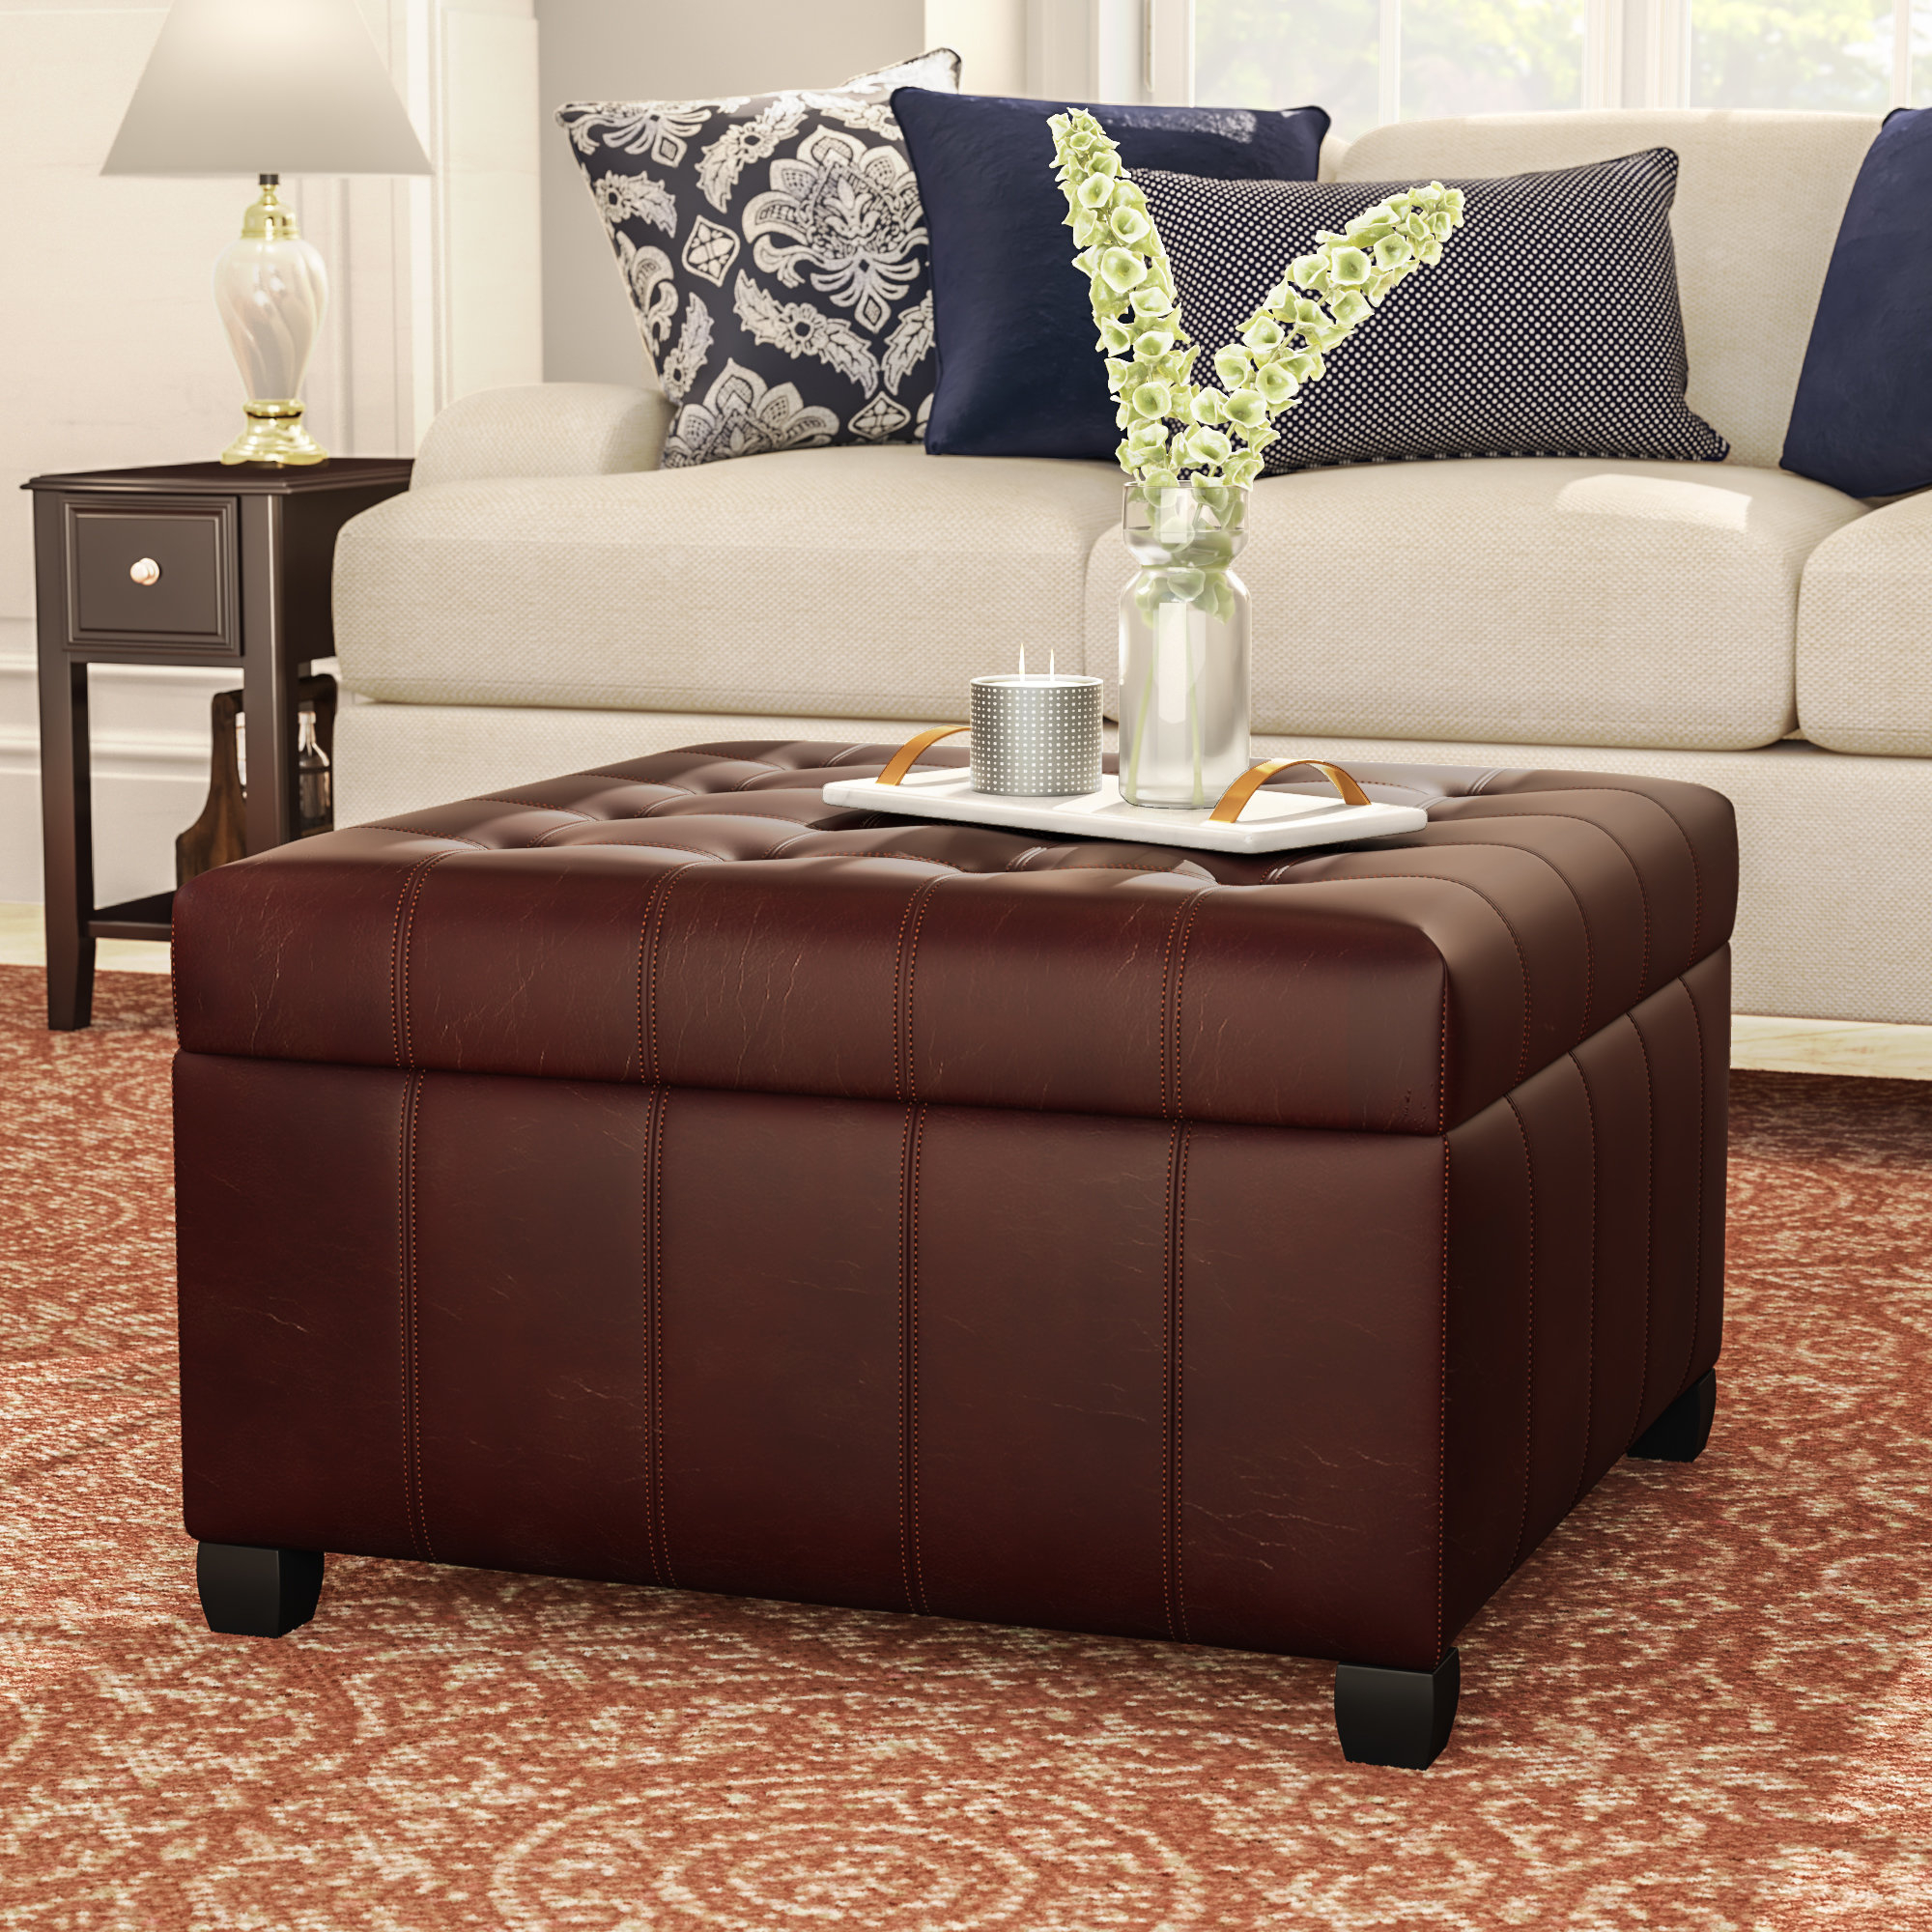 Dar Home Co Francisville Leather Storage Ottoman Reviews Wayfair intended for measurements 2000 X 2000